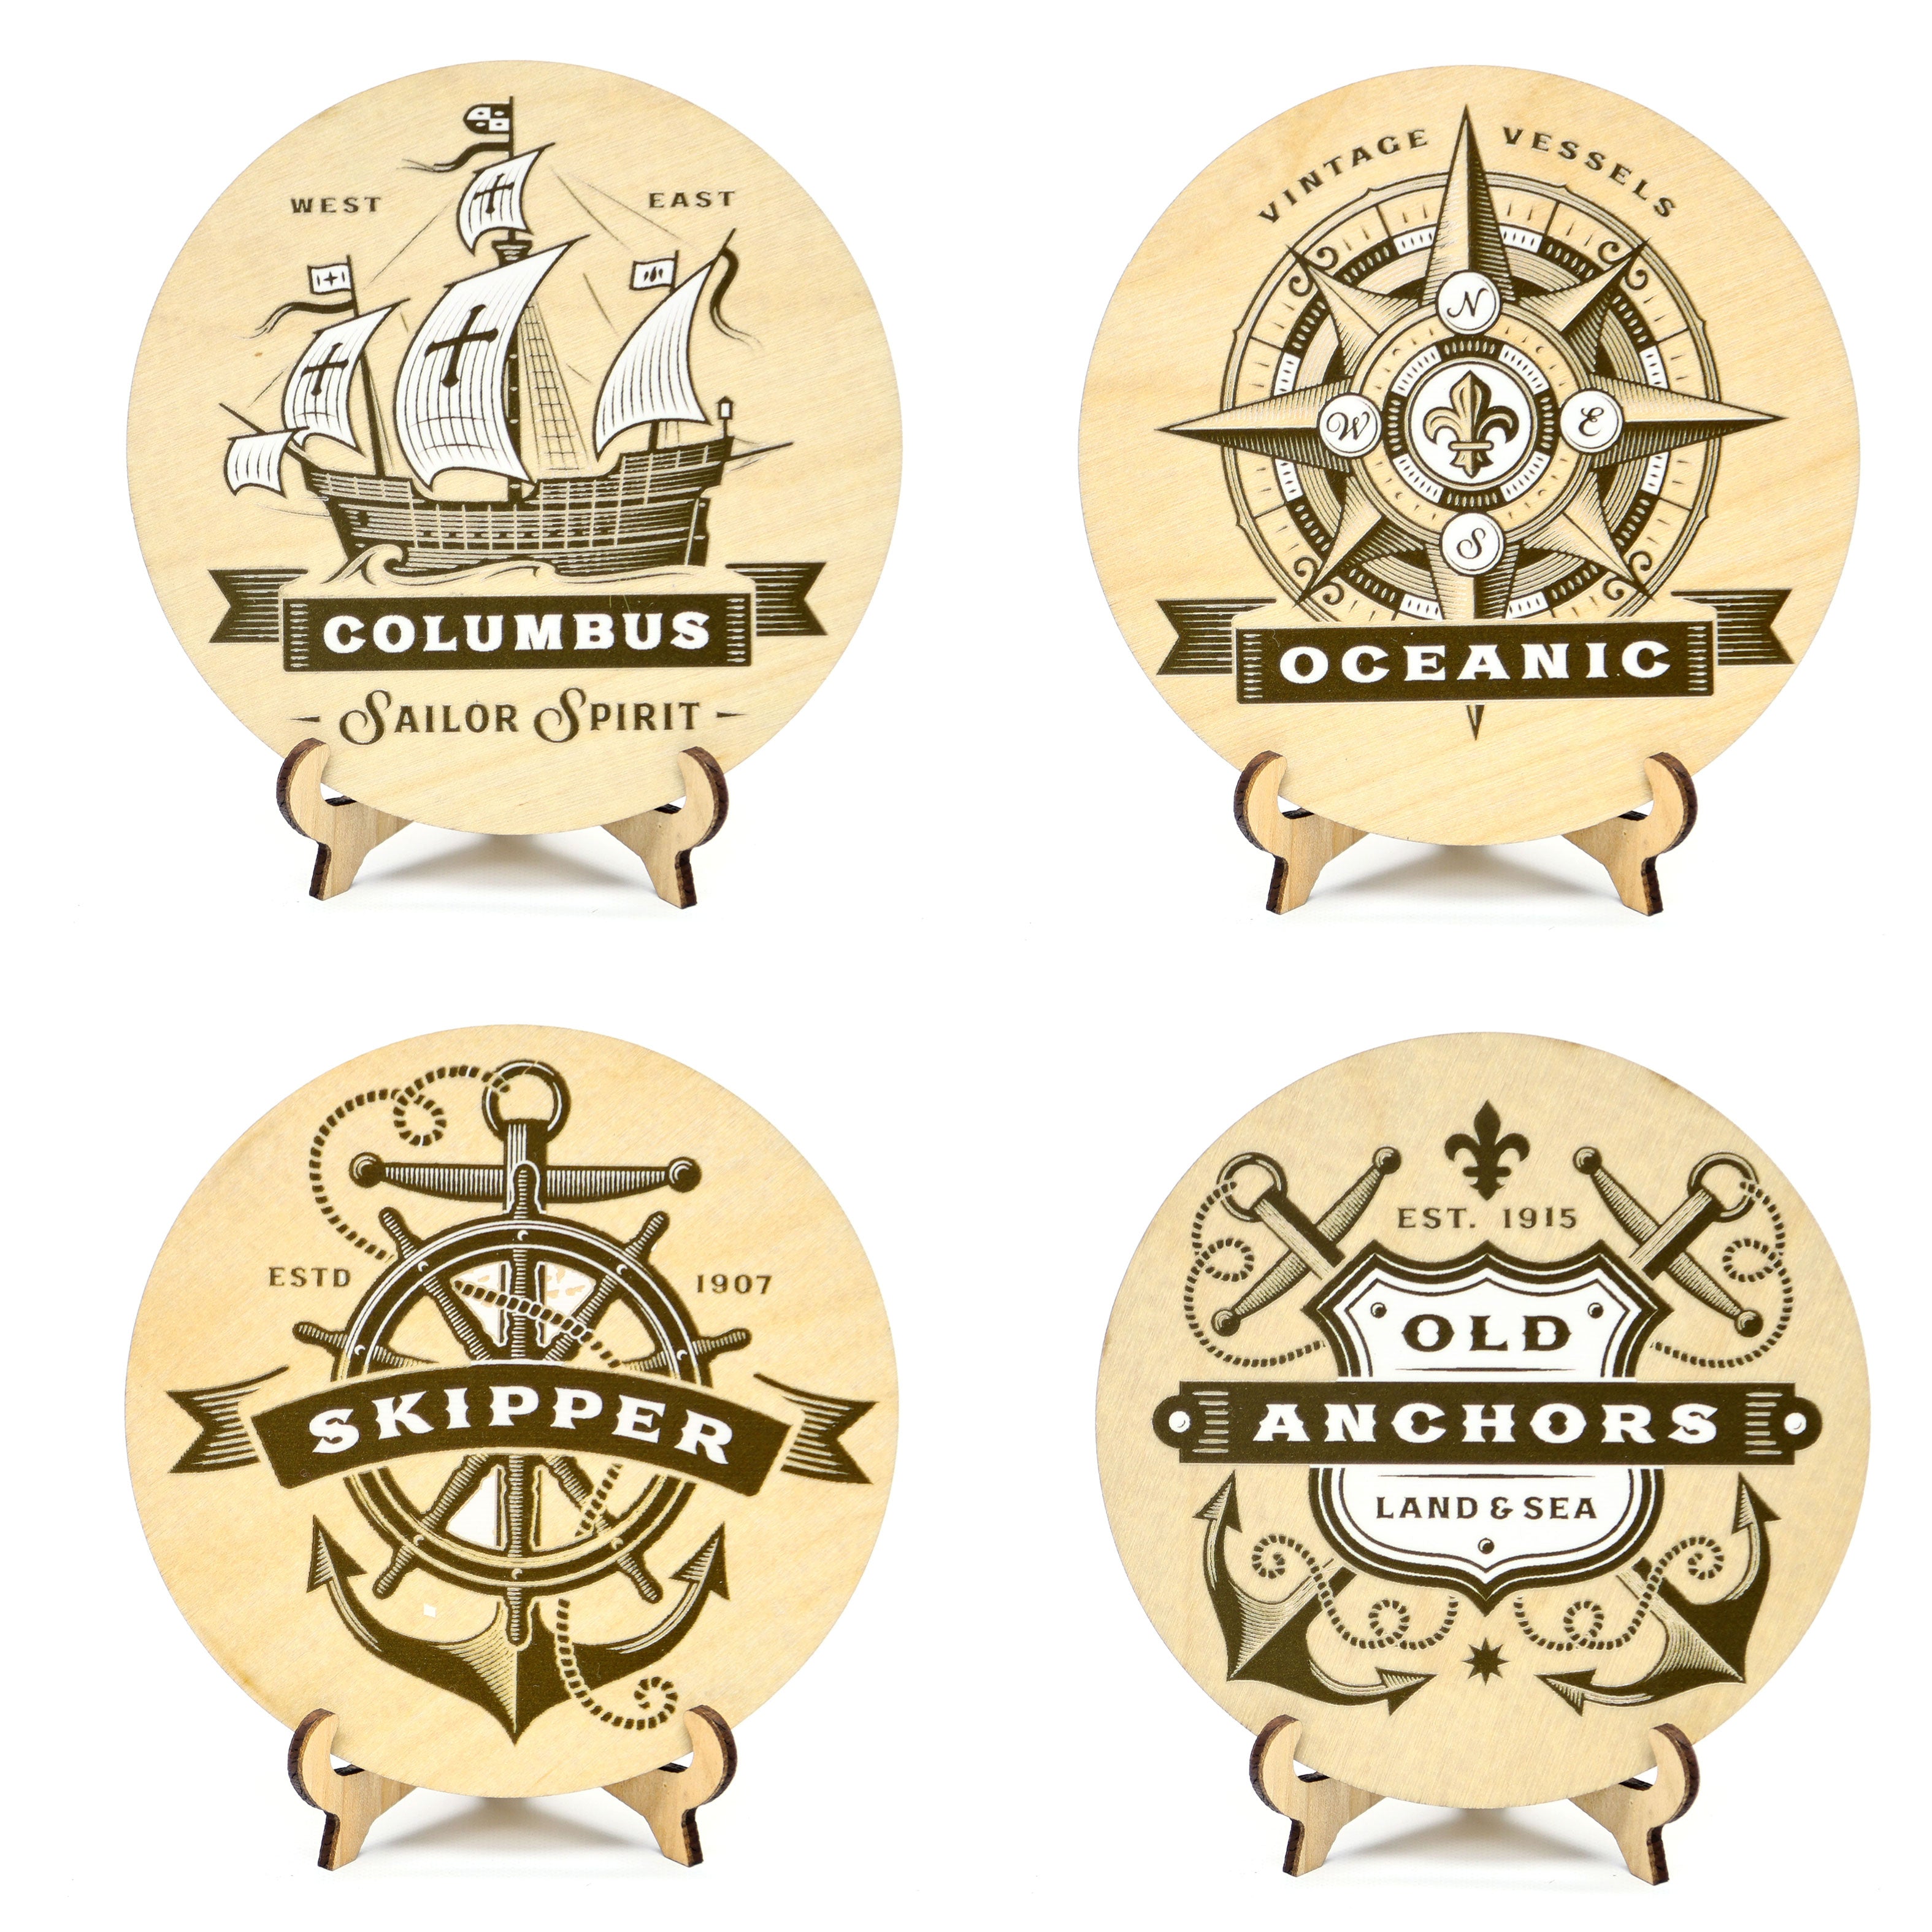 Wooden Coasters Set of 4 Pieces with a Nautical Designs